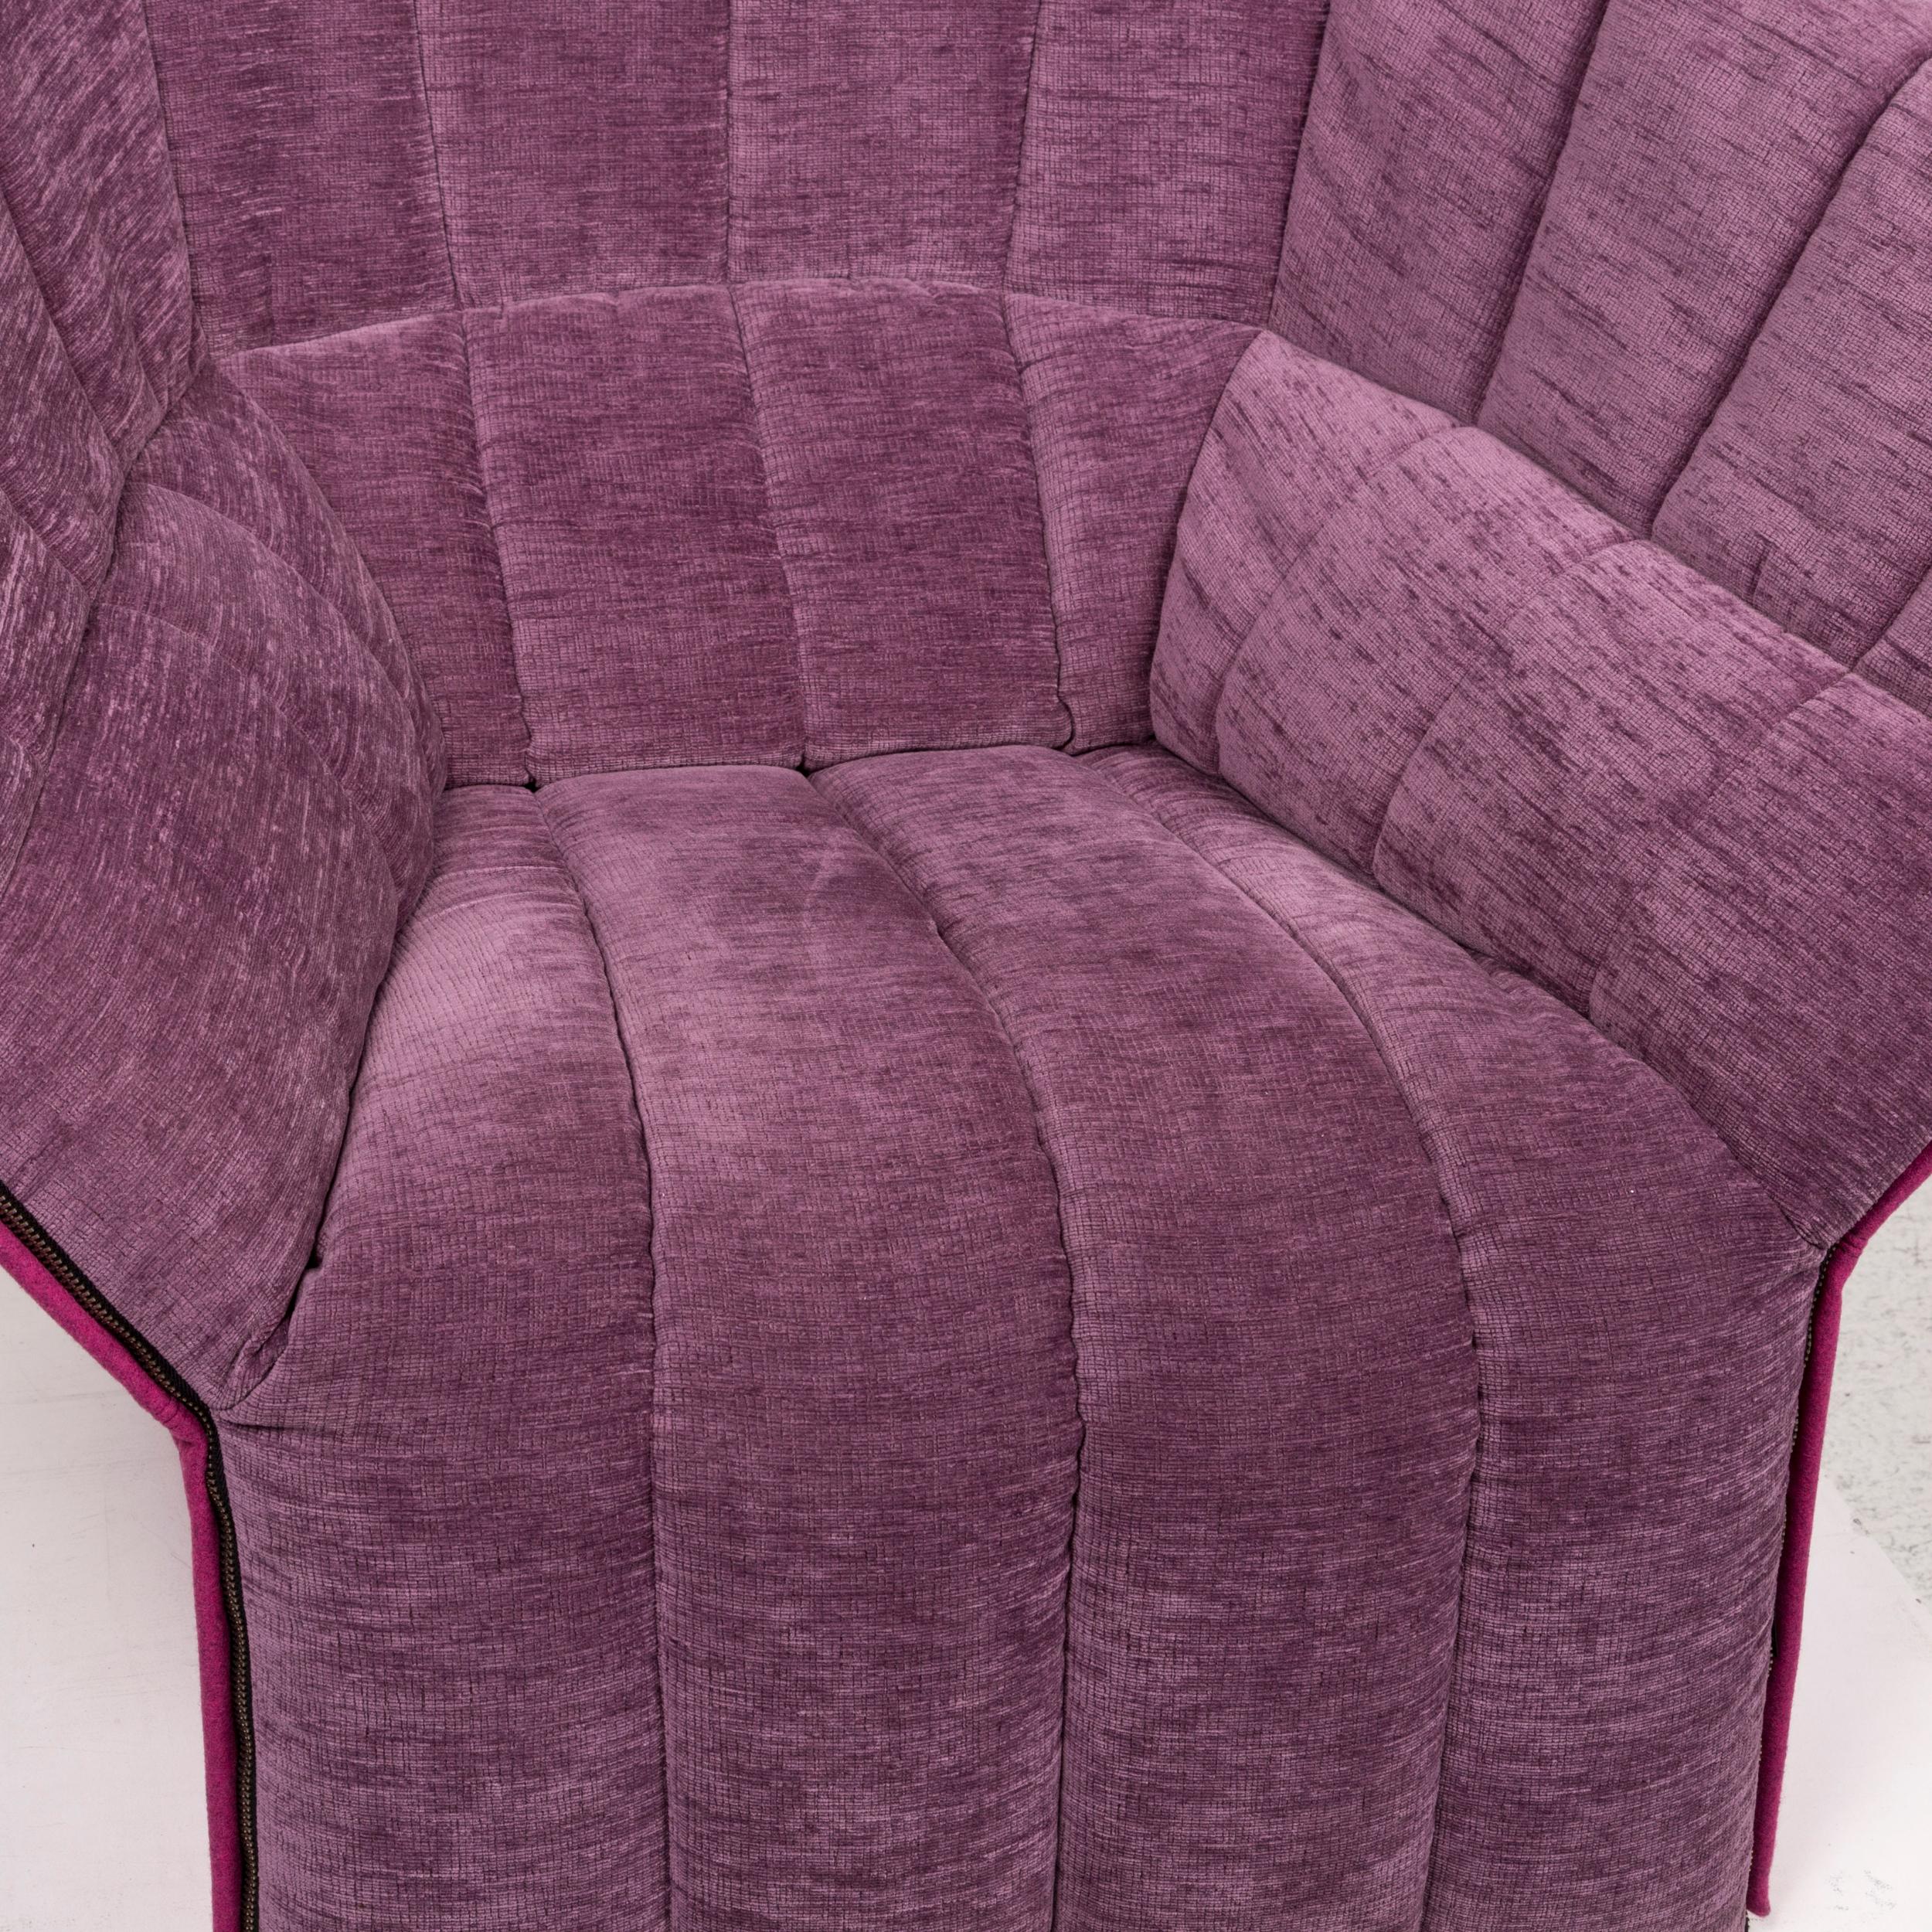 We bring to you a ligne roset fabric armchair purple.



 Product measurements in centimeters:
 

Depth 85
Width 120
Height 97
Seat-height 39
Rest-height 76
Seat-depth 54
Seat-width 45
Back-height 61.